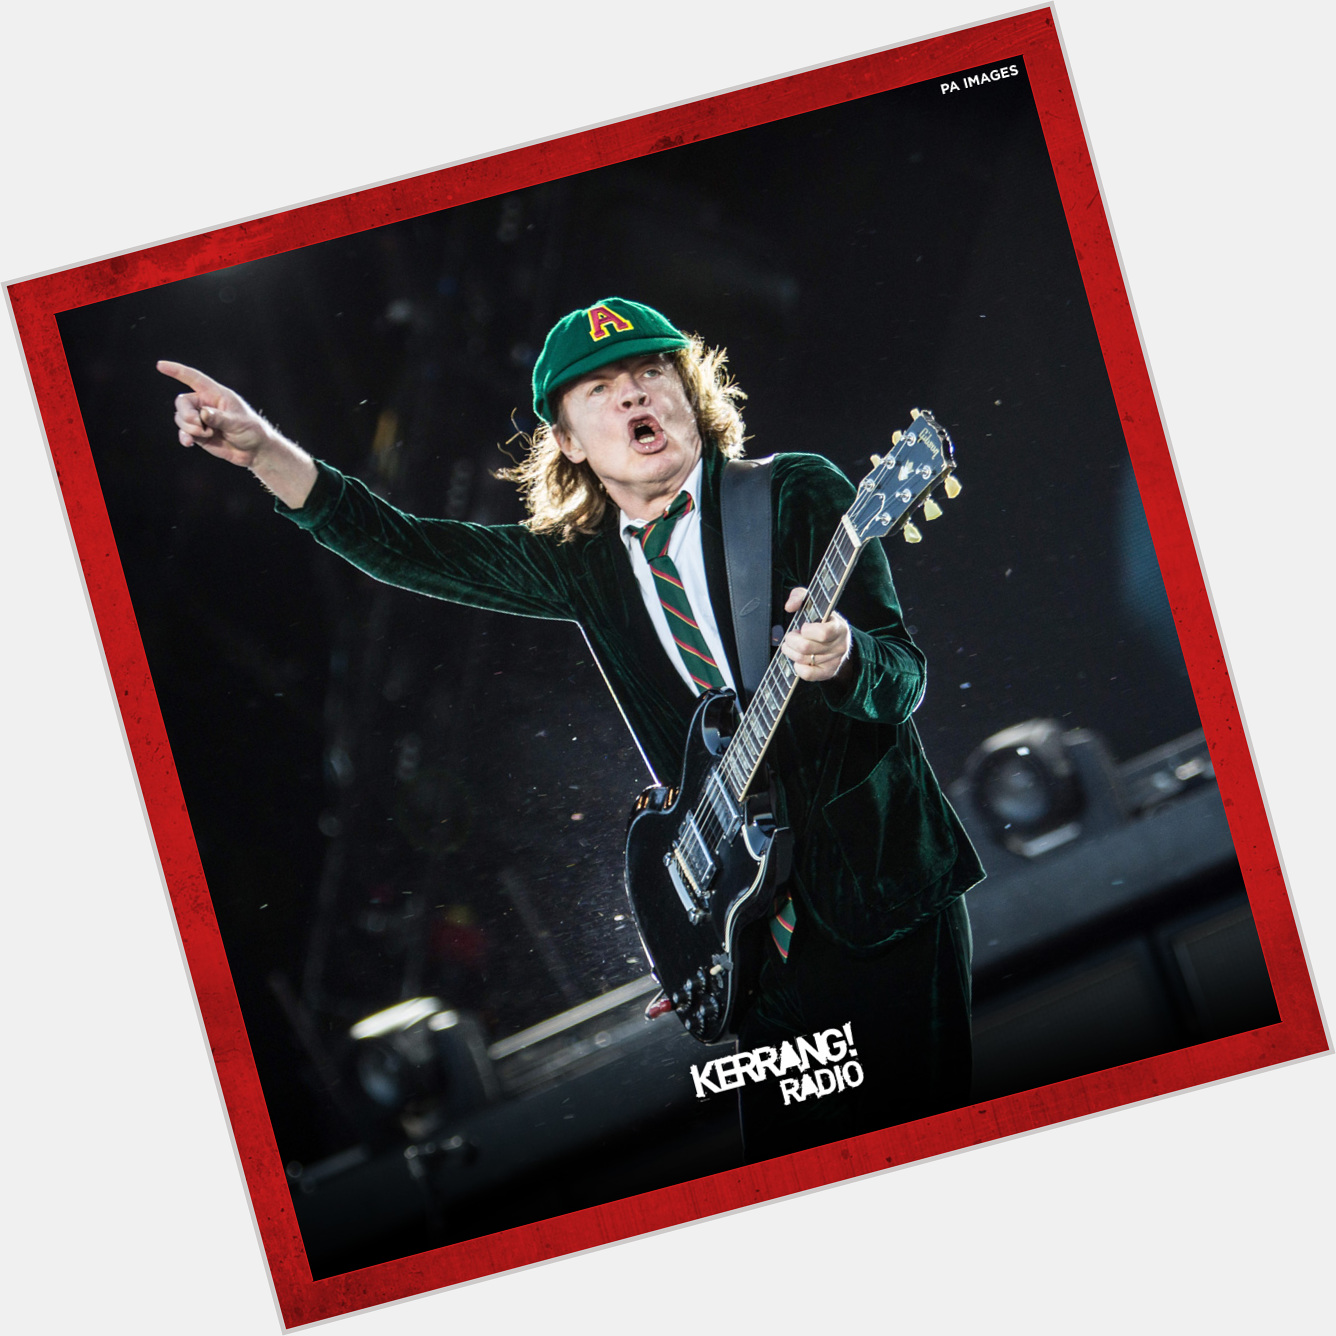 Happy birthday to AC/DC\s Angus Young, 65 years young today! 